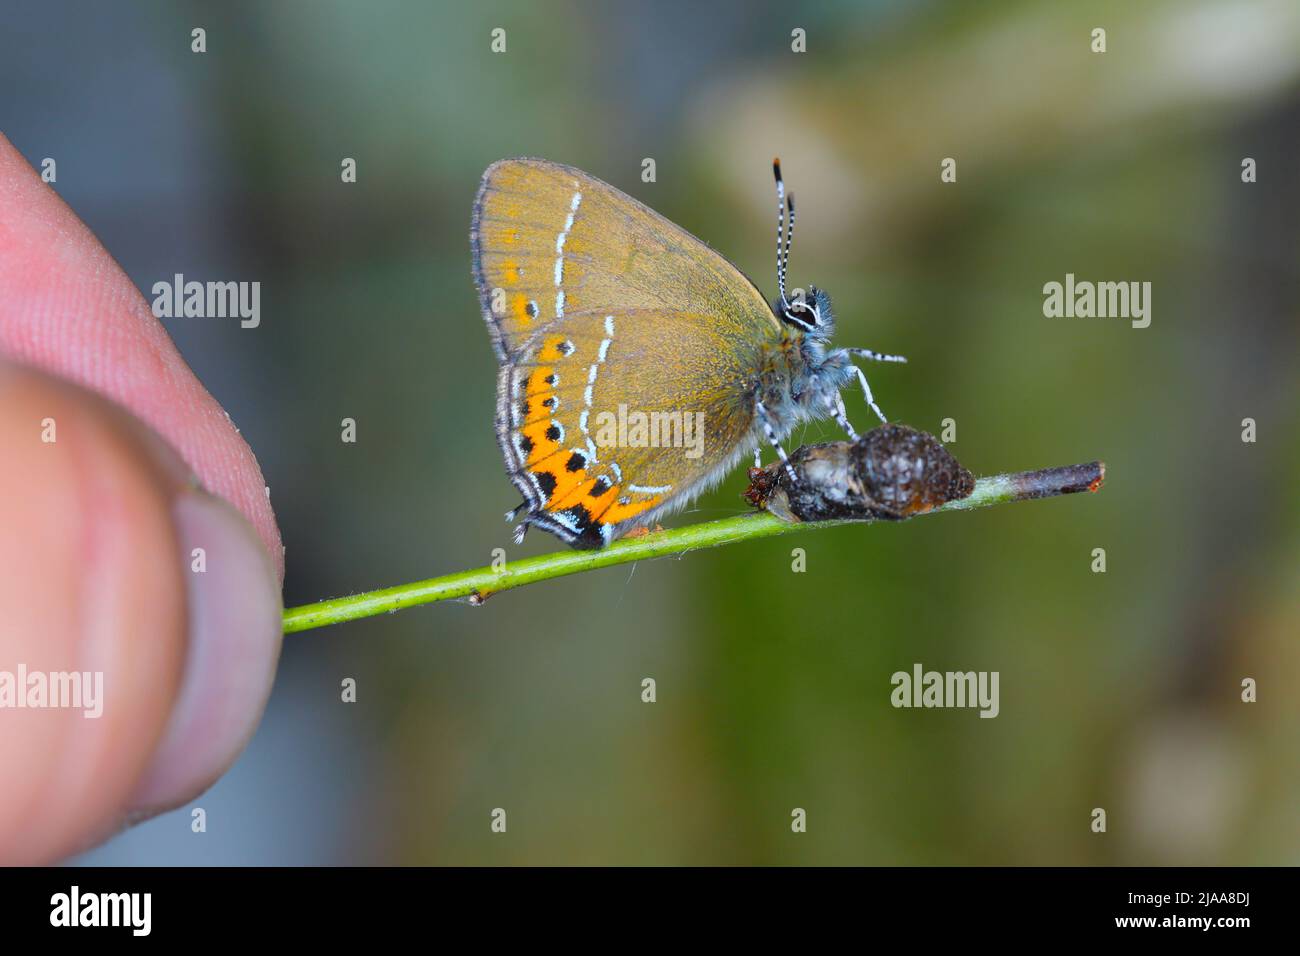 Black Hairstreak (Satyrium pruni, Fixsenia pruni). A young butterfly freshly hatched from a pupa. Stock Photo